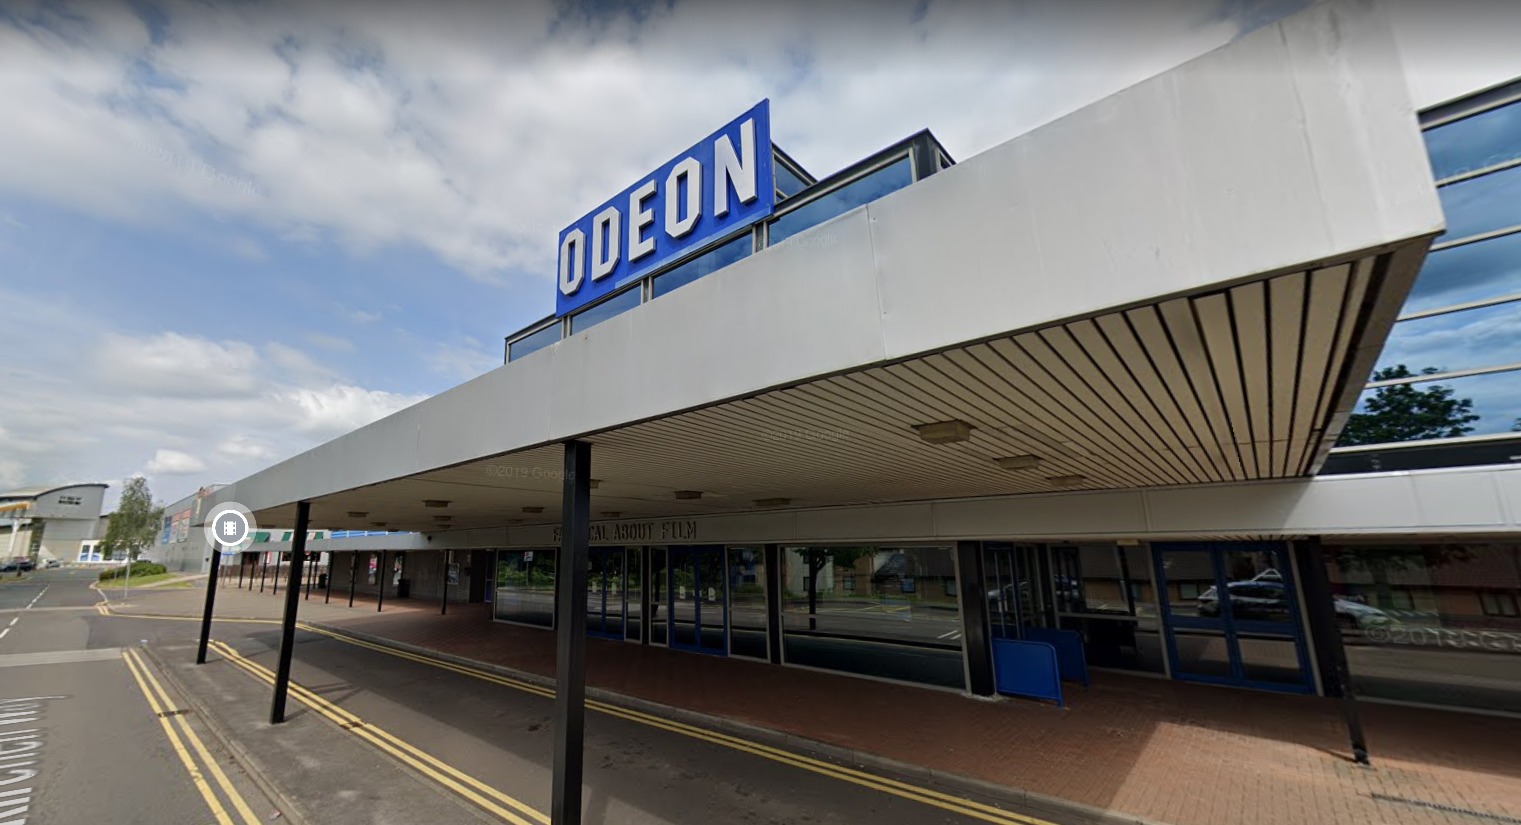 The council owned Odeon Cinema in Basingstoke